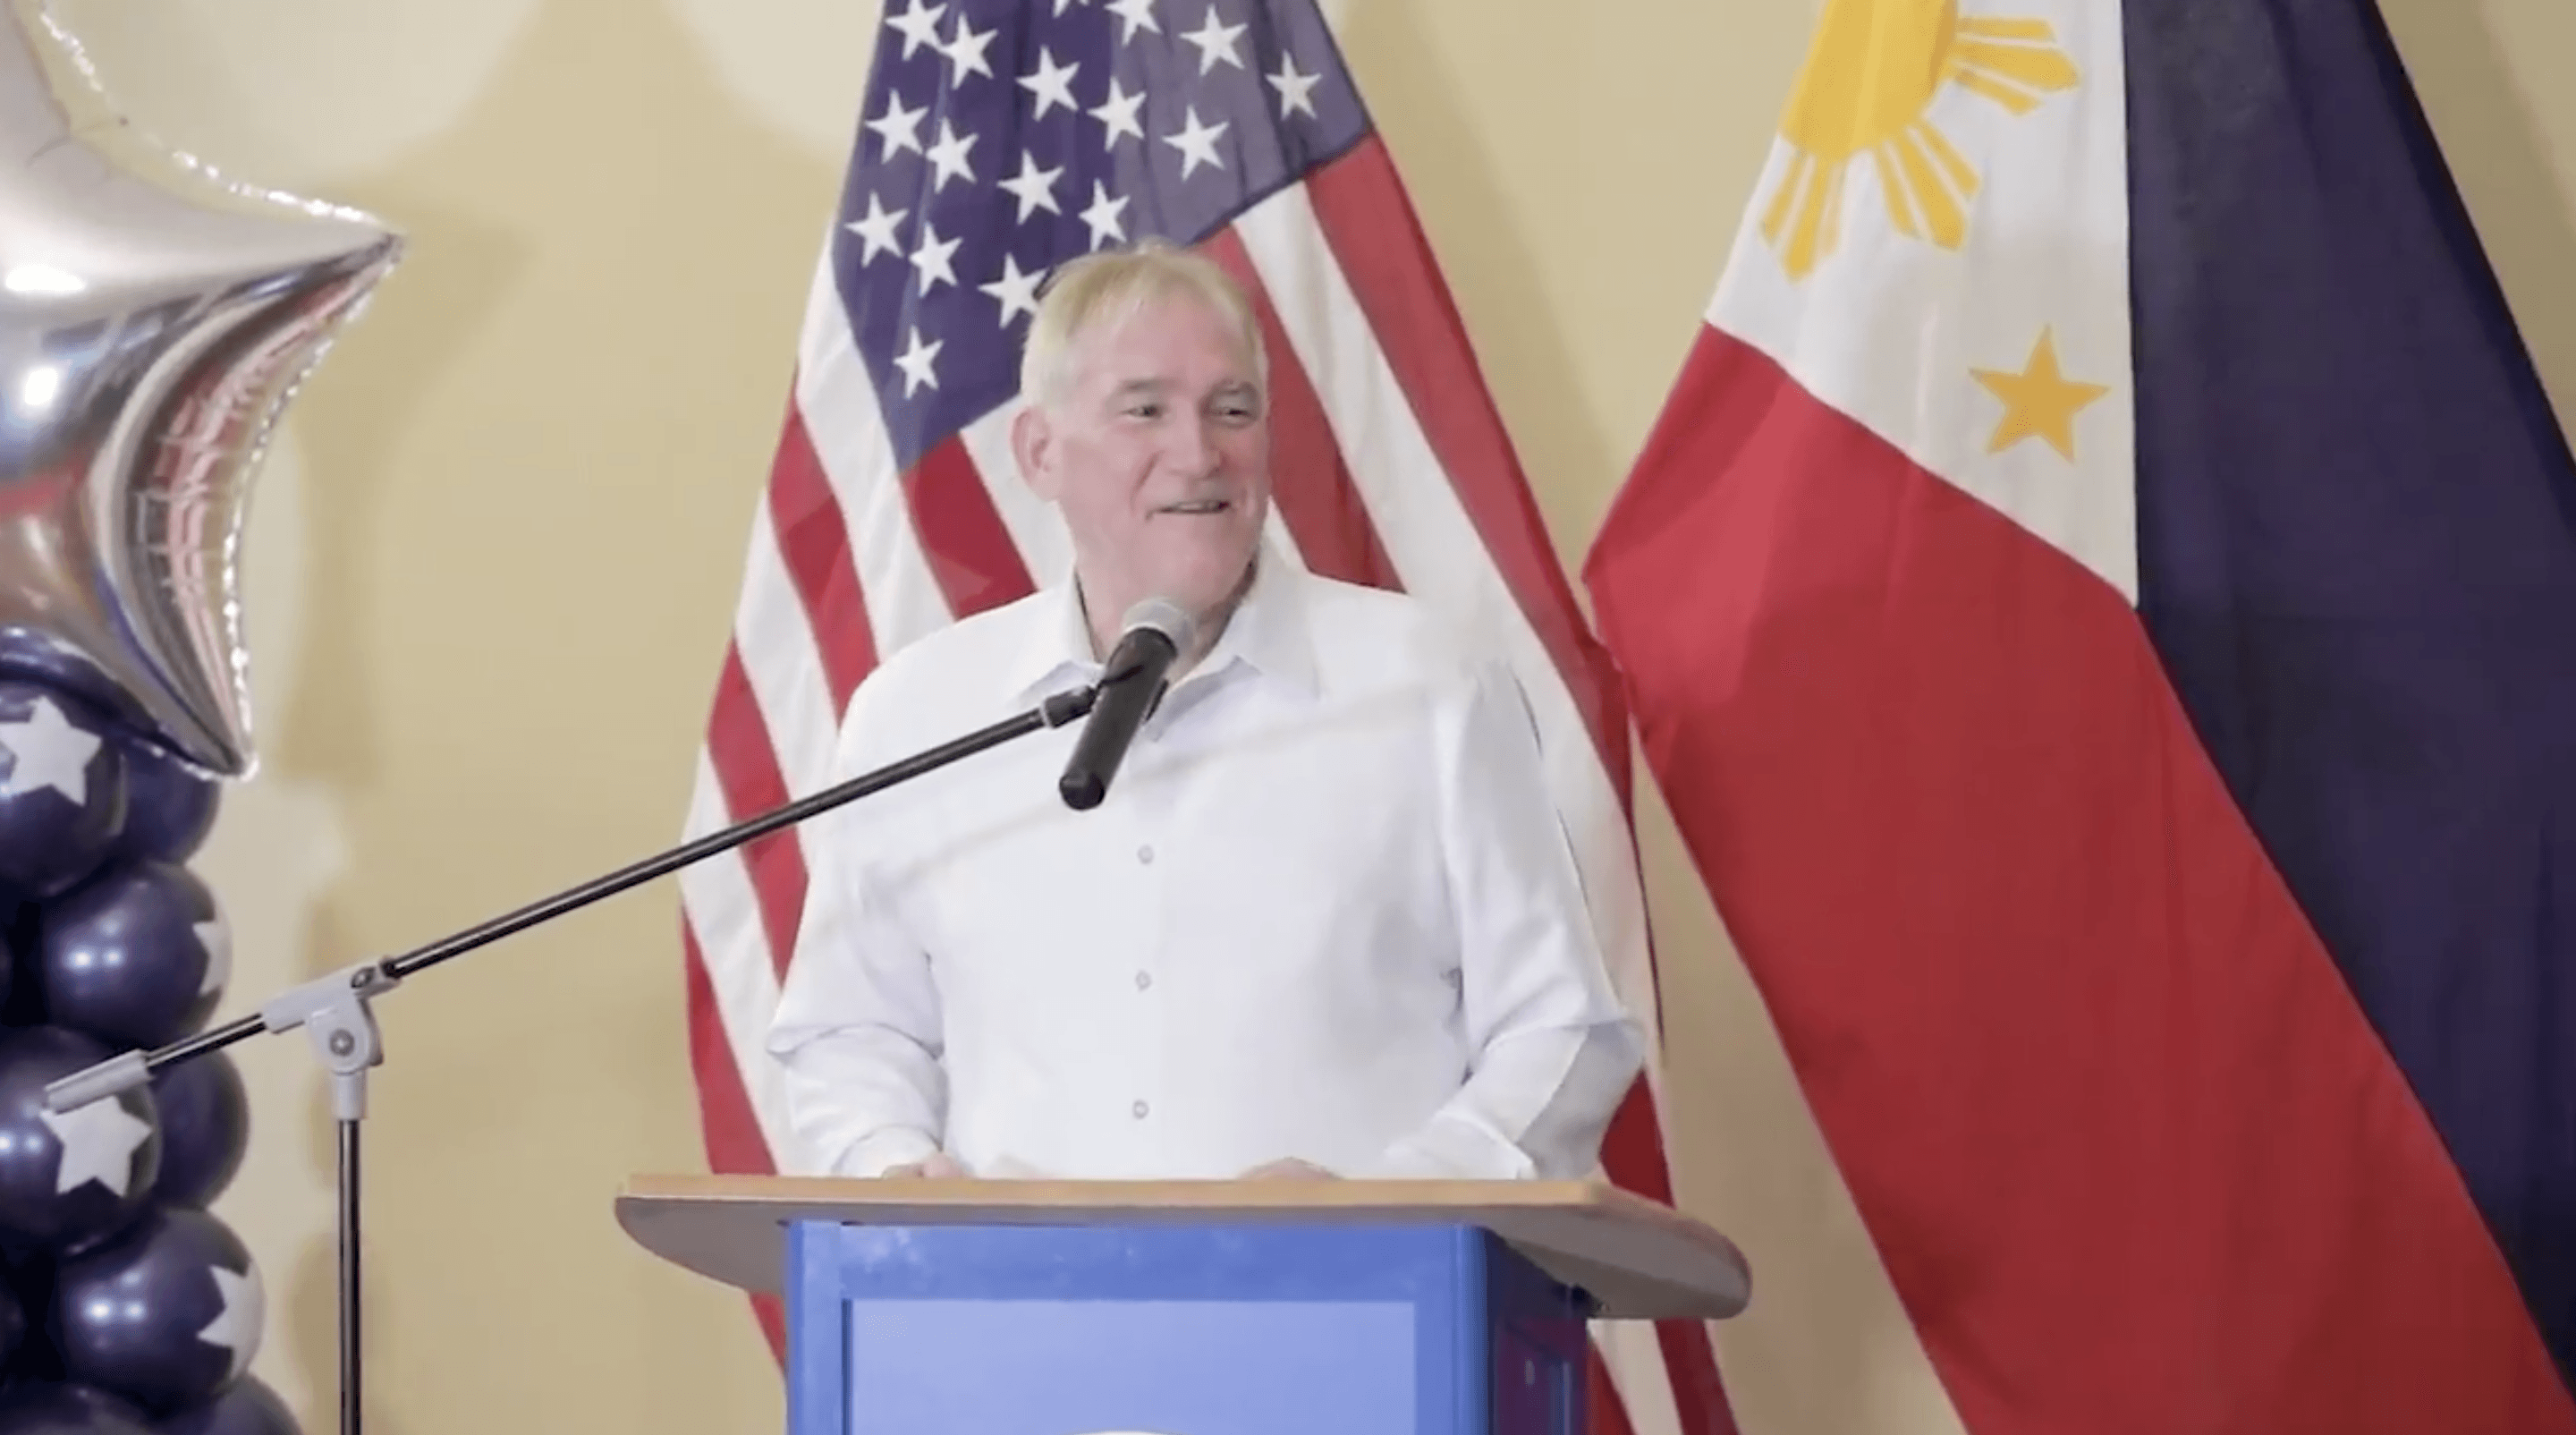 Beyond elections, US vows friendship with Philippines ‘will only grow’